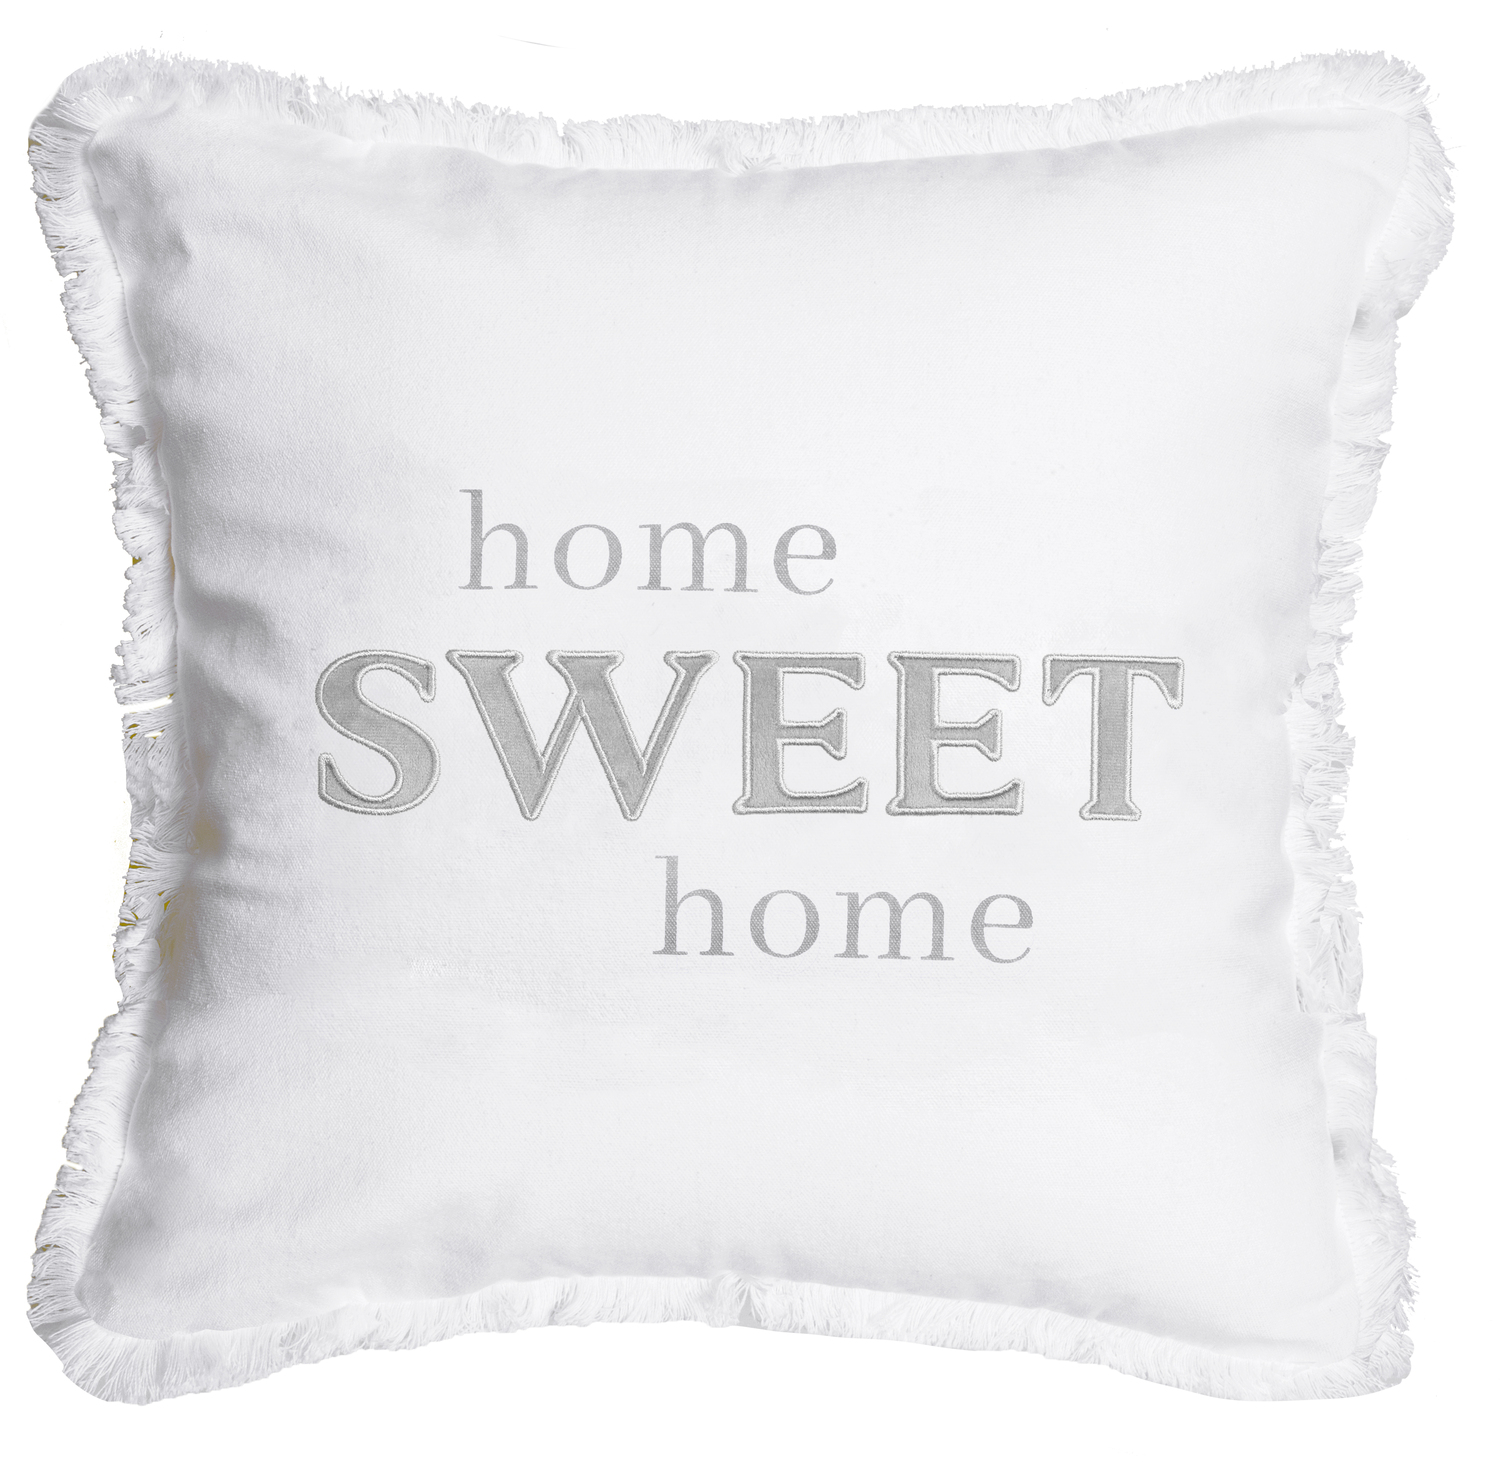 Home Sweet Home by Tossing Words Around - Home Sweet Home - 18" Throw Pillow Cover